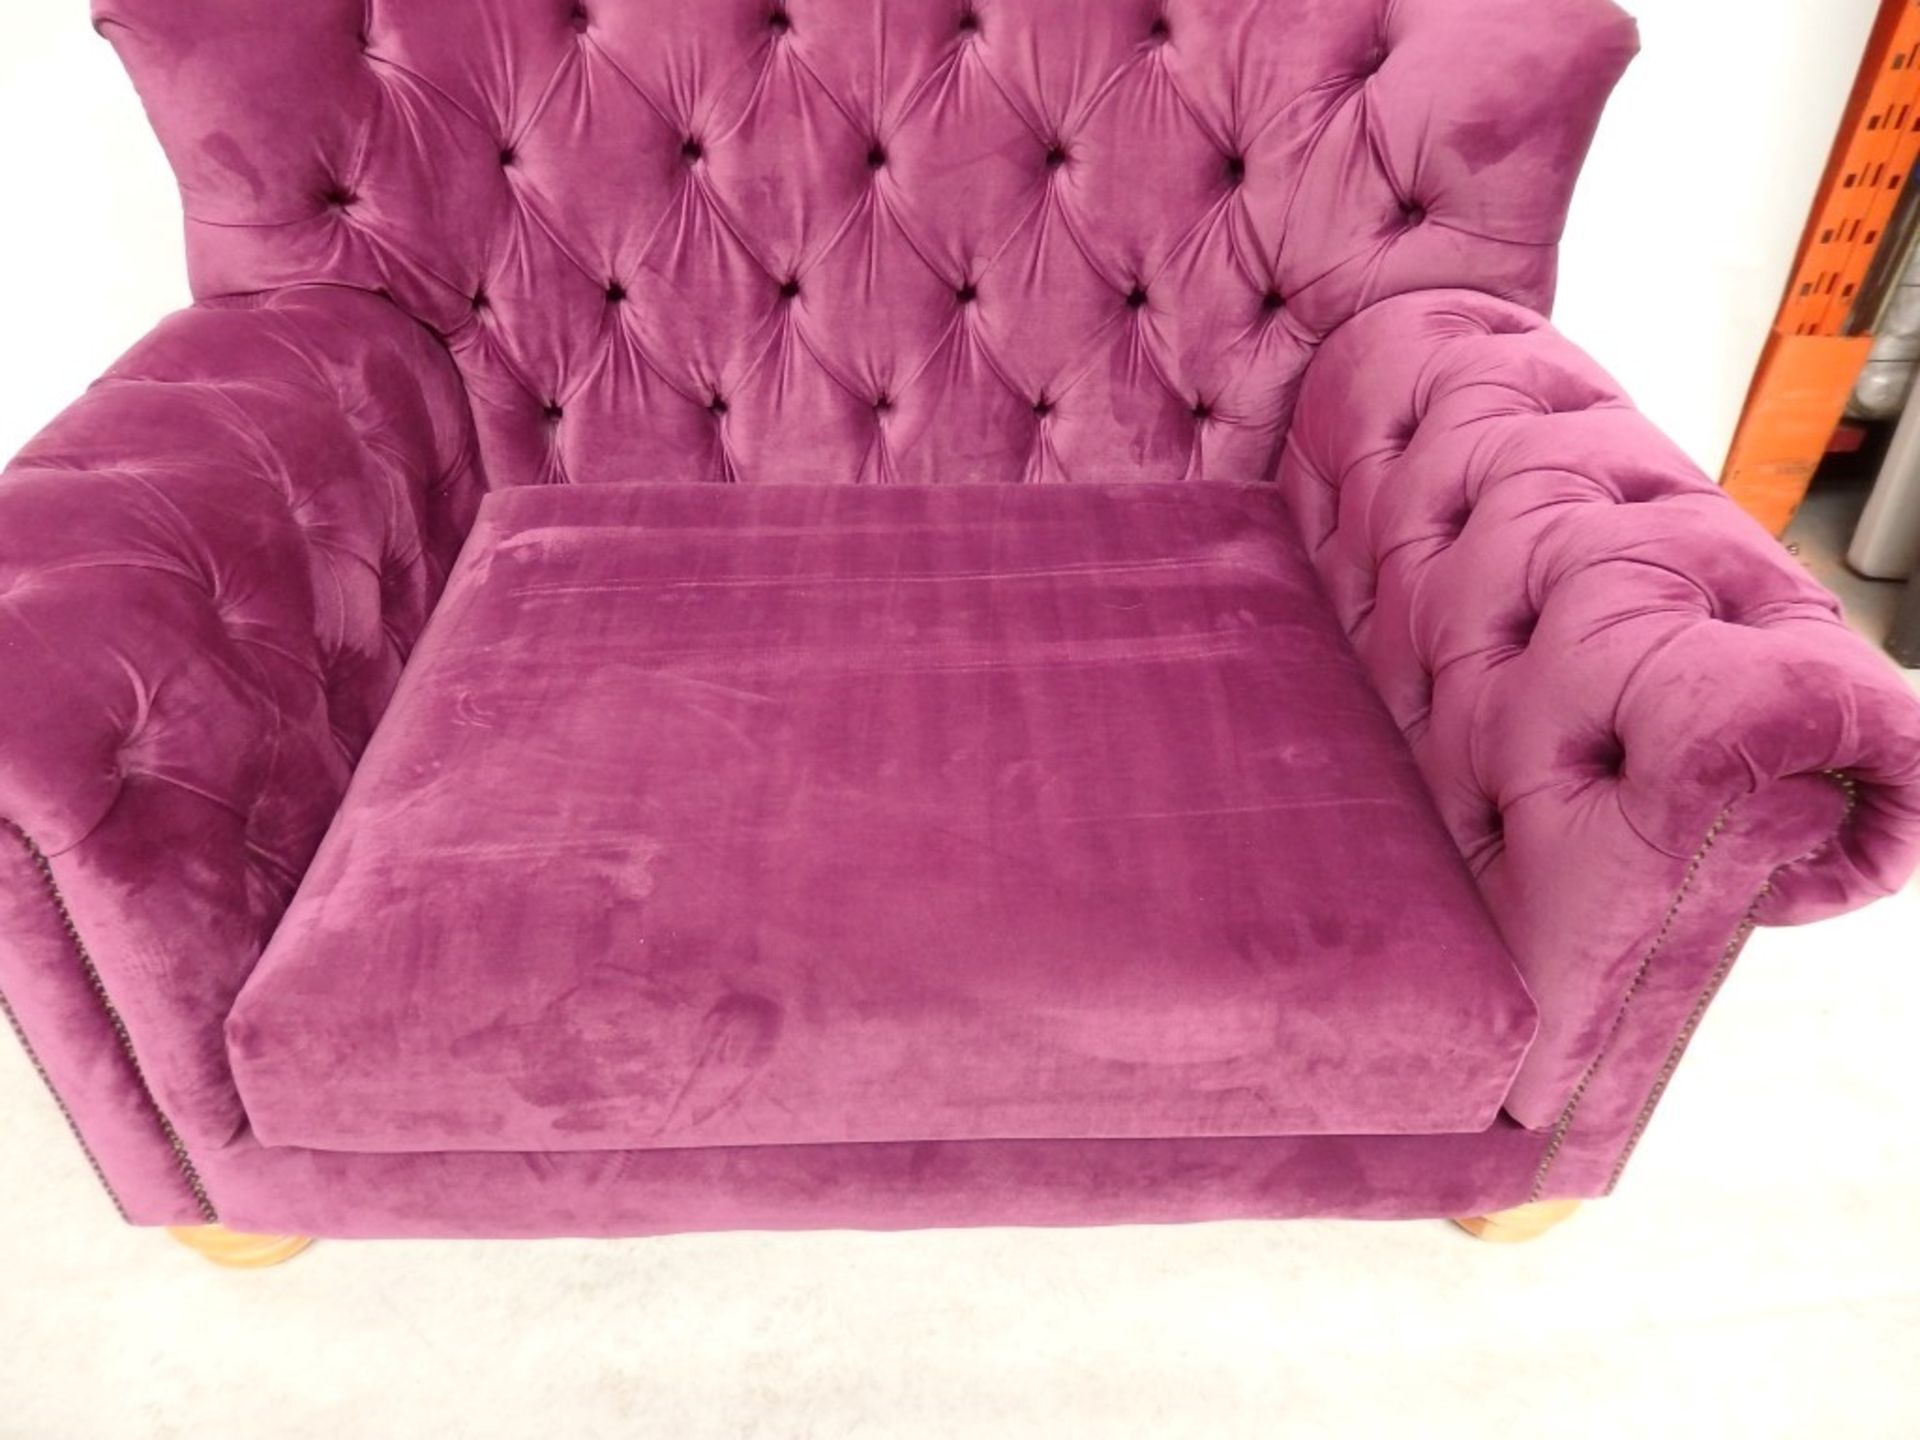 1 x Bespoke Oversized Chair (Cuddle Chair) - Upholstered In A Ritch Magenta Chenille - Expertly - Image 8 of 10